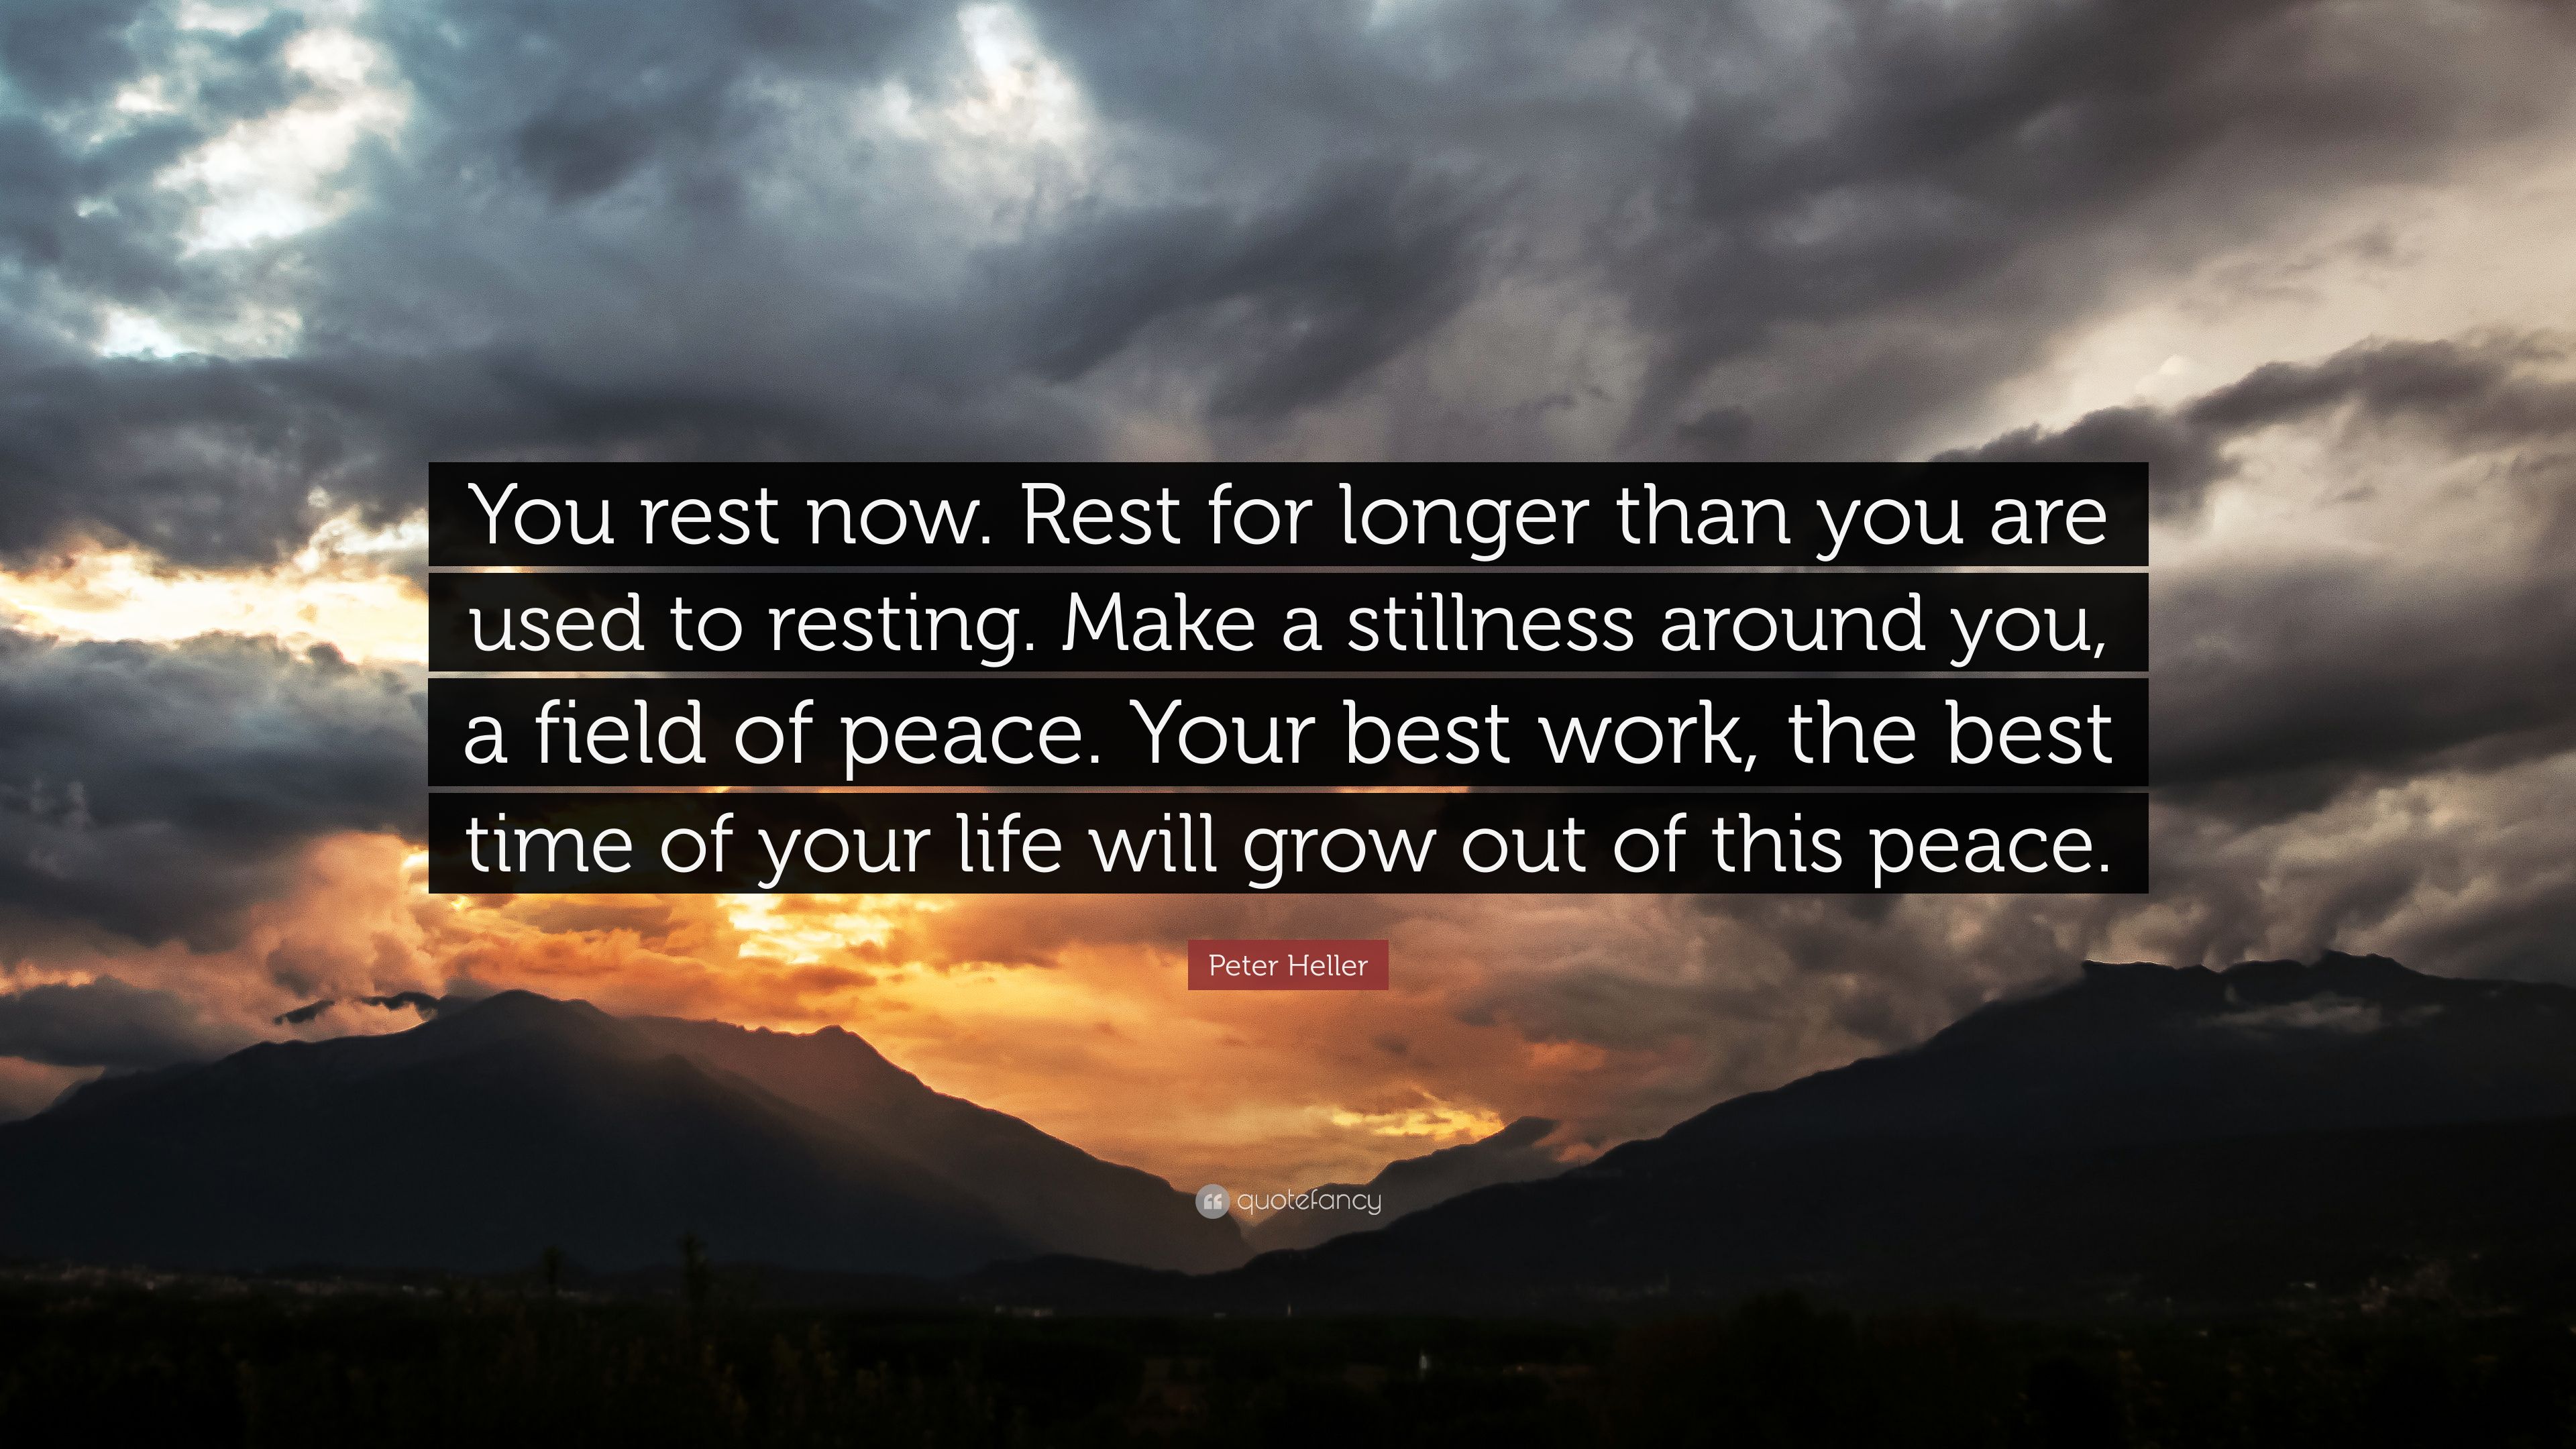 Peter Heller Quote: “You rest now. Rest for longer than you are used to resting. Make a stillness around you, a field of peace. Your best wor.” (7 wallpaper)